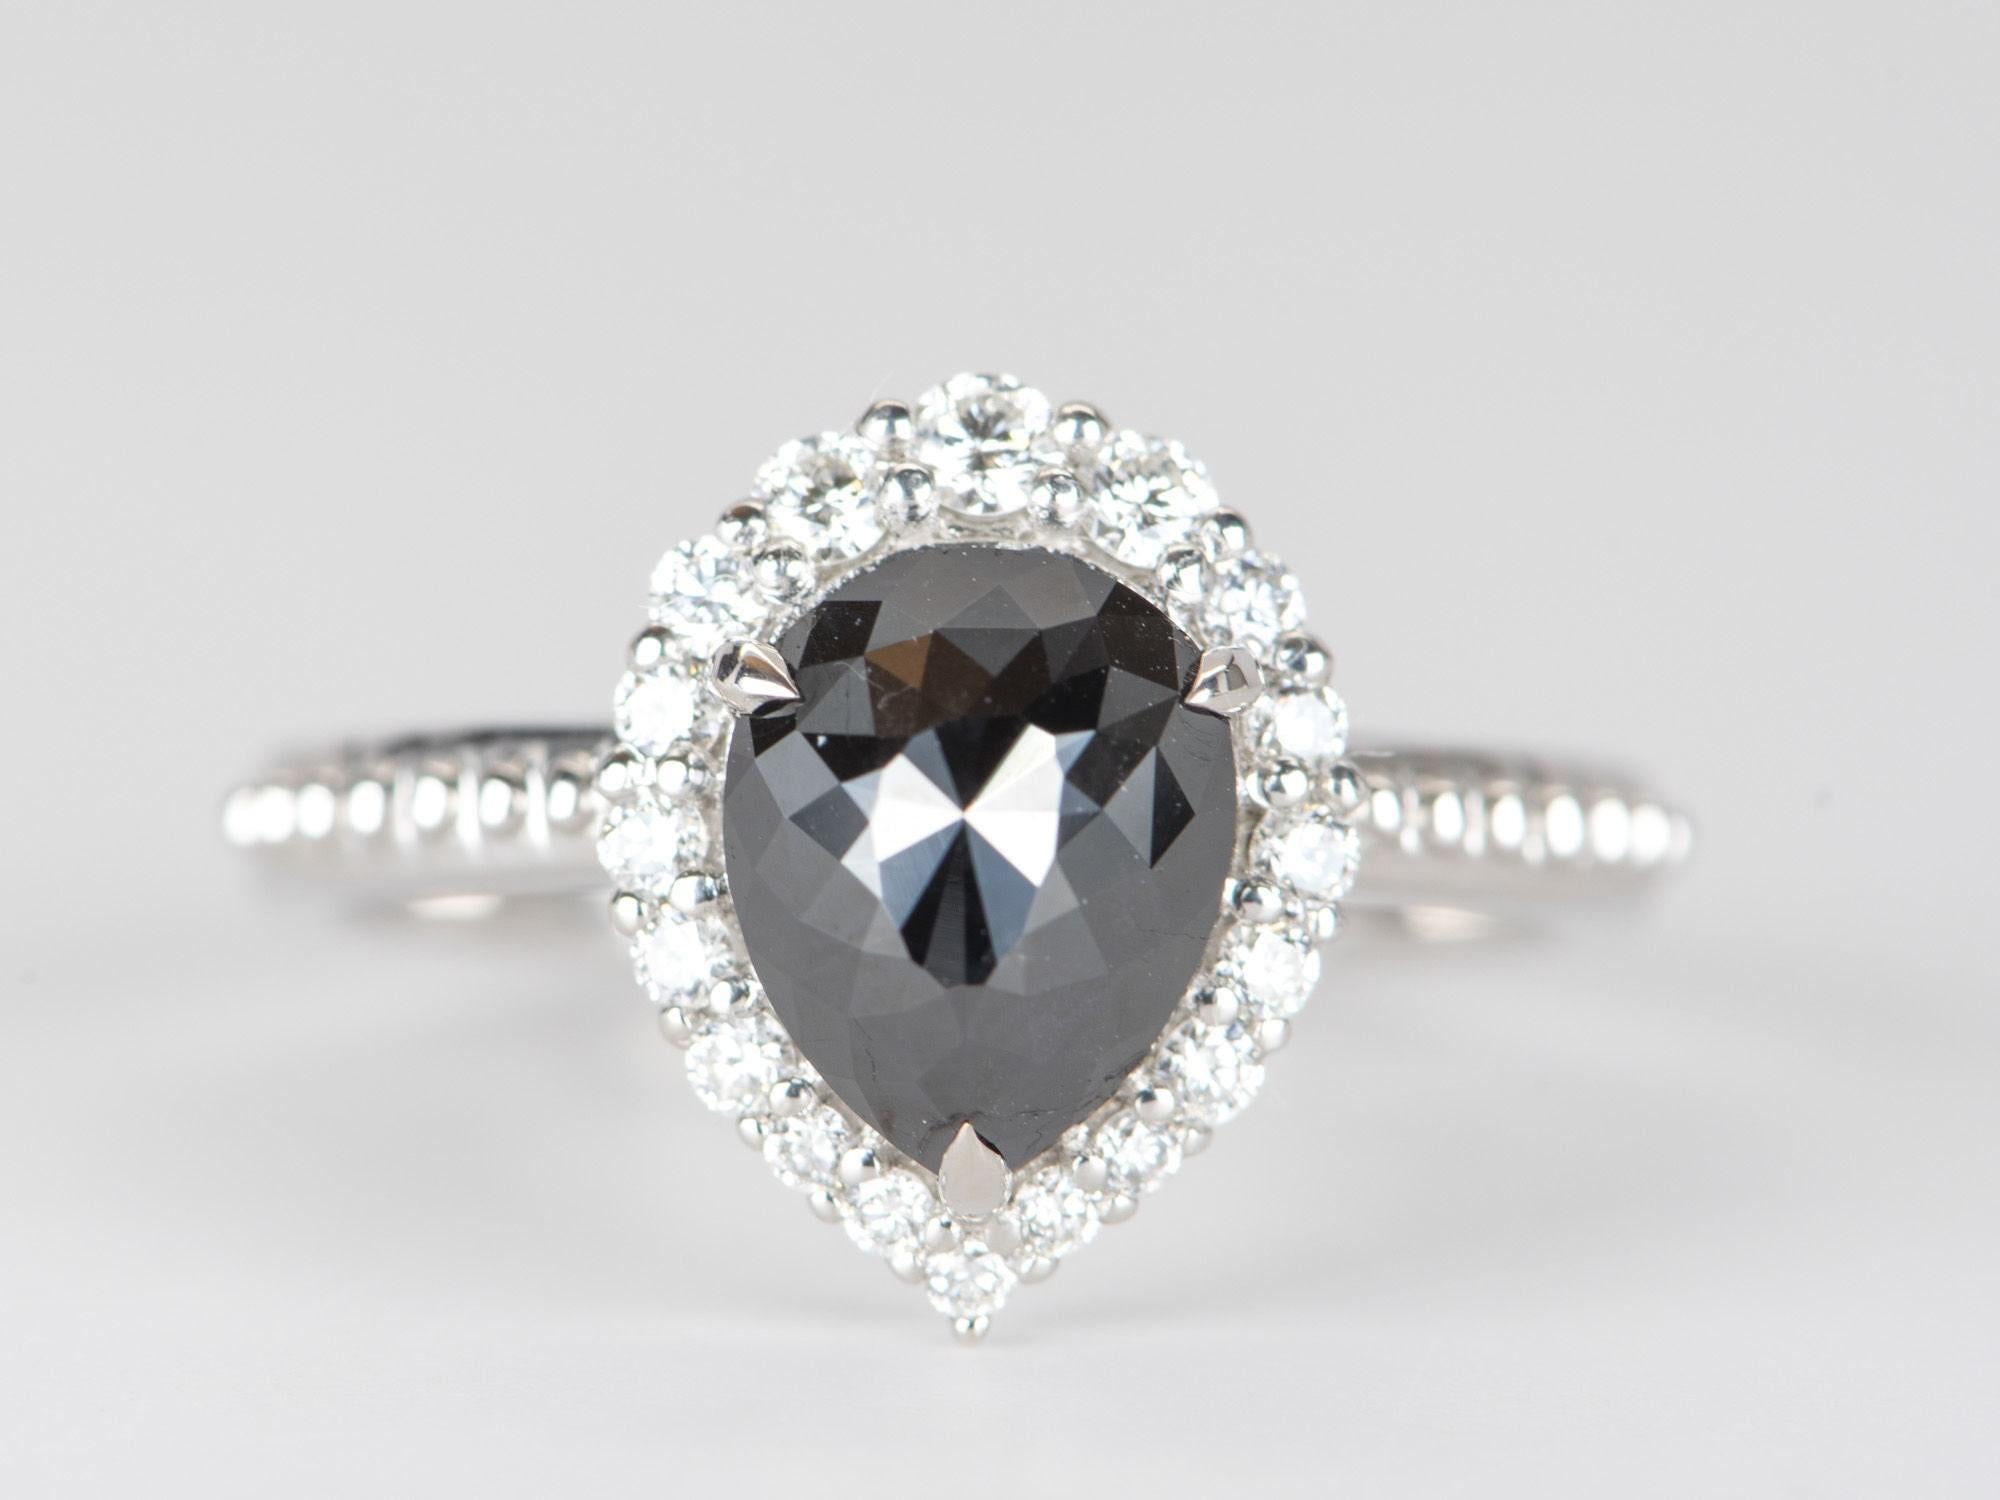 ♥ 1.74ct Black Diamond with Clear Halo 14K White Gold Engagement Ring
♥ Solid 14k white gold ring set with a beautiful pear-shaped diamond
♥ Gorgeous black color!
♥ The item measures 13.3 mm in length, 10.6 mm in width, and stands 7.5 mm from the